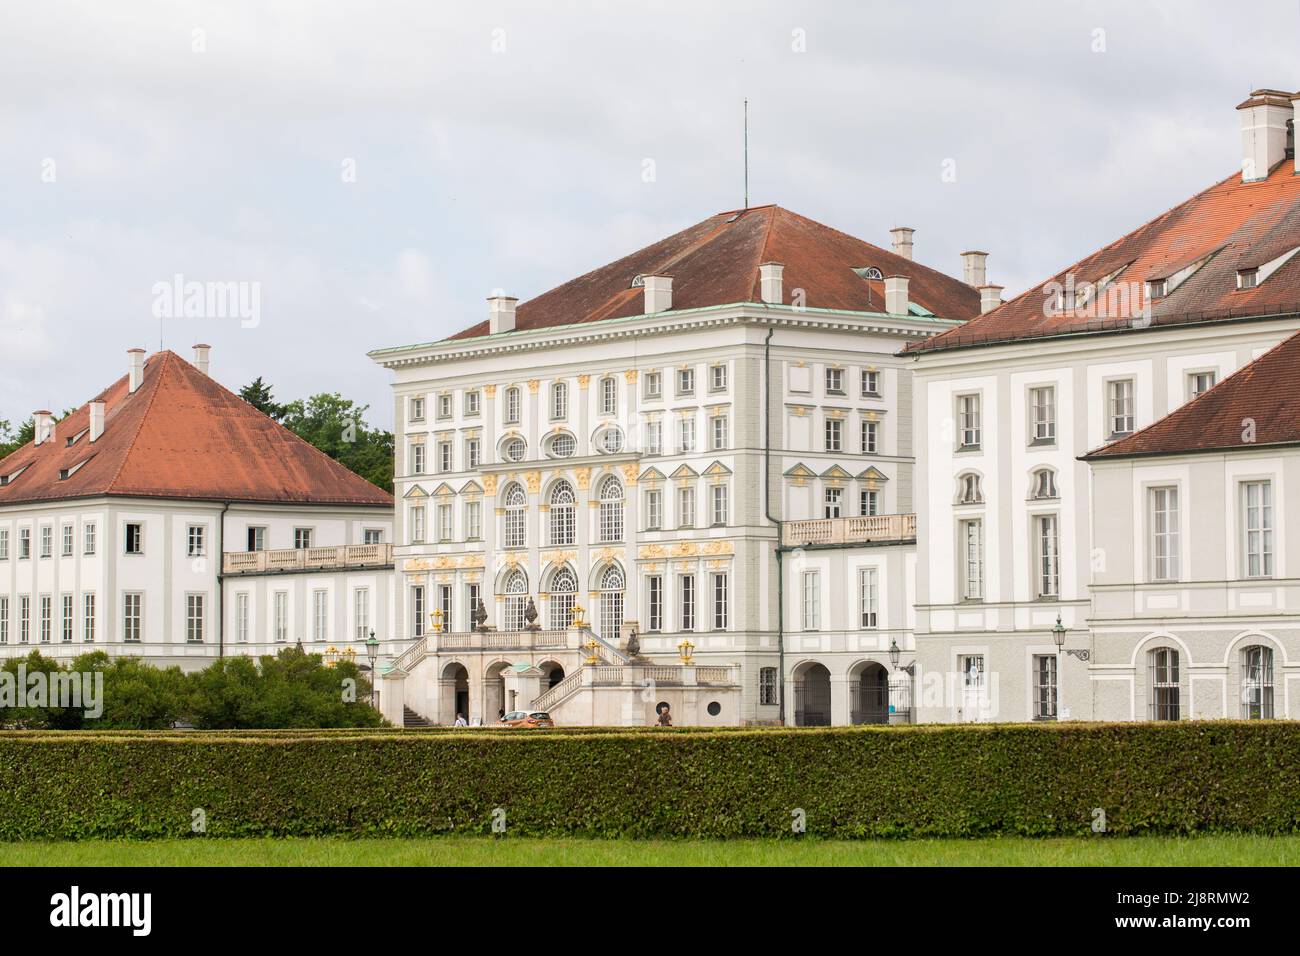 Munich, Germany - Jul 2, 2021: View on the main building of Nymphenburg Palace. Stock Photo